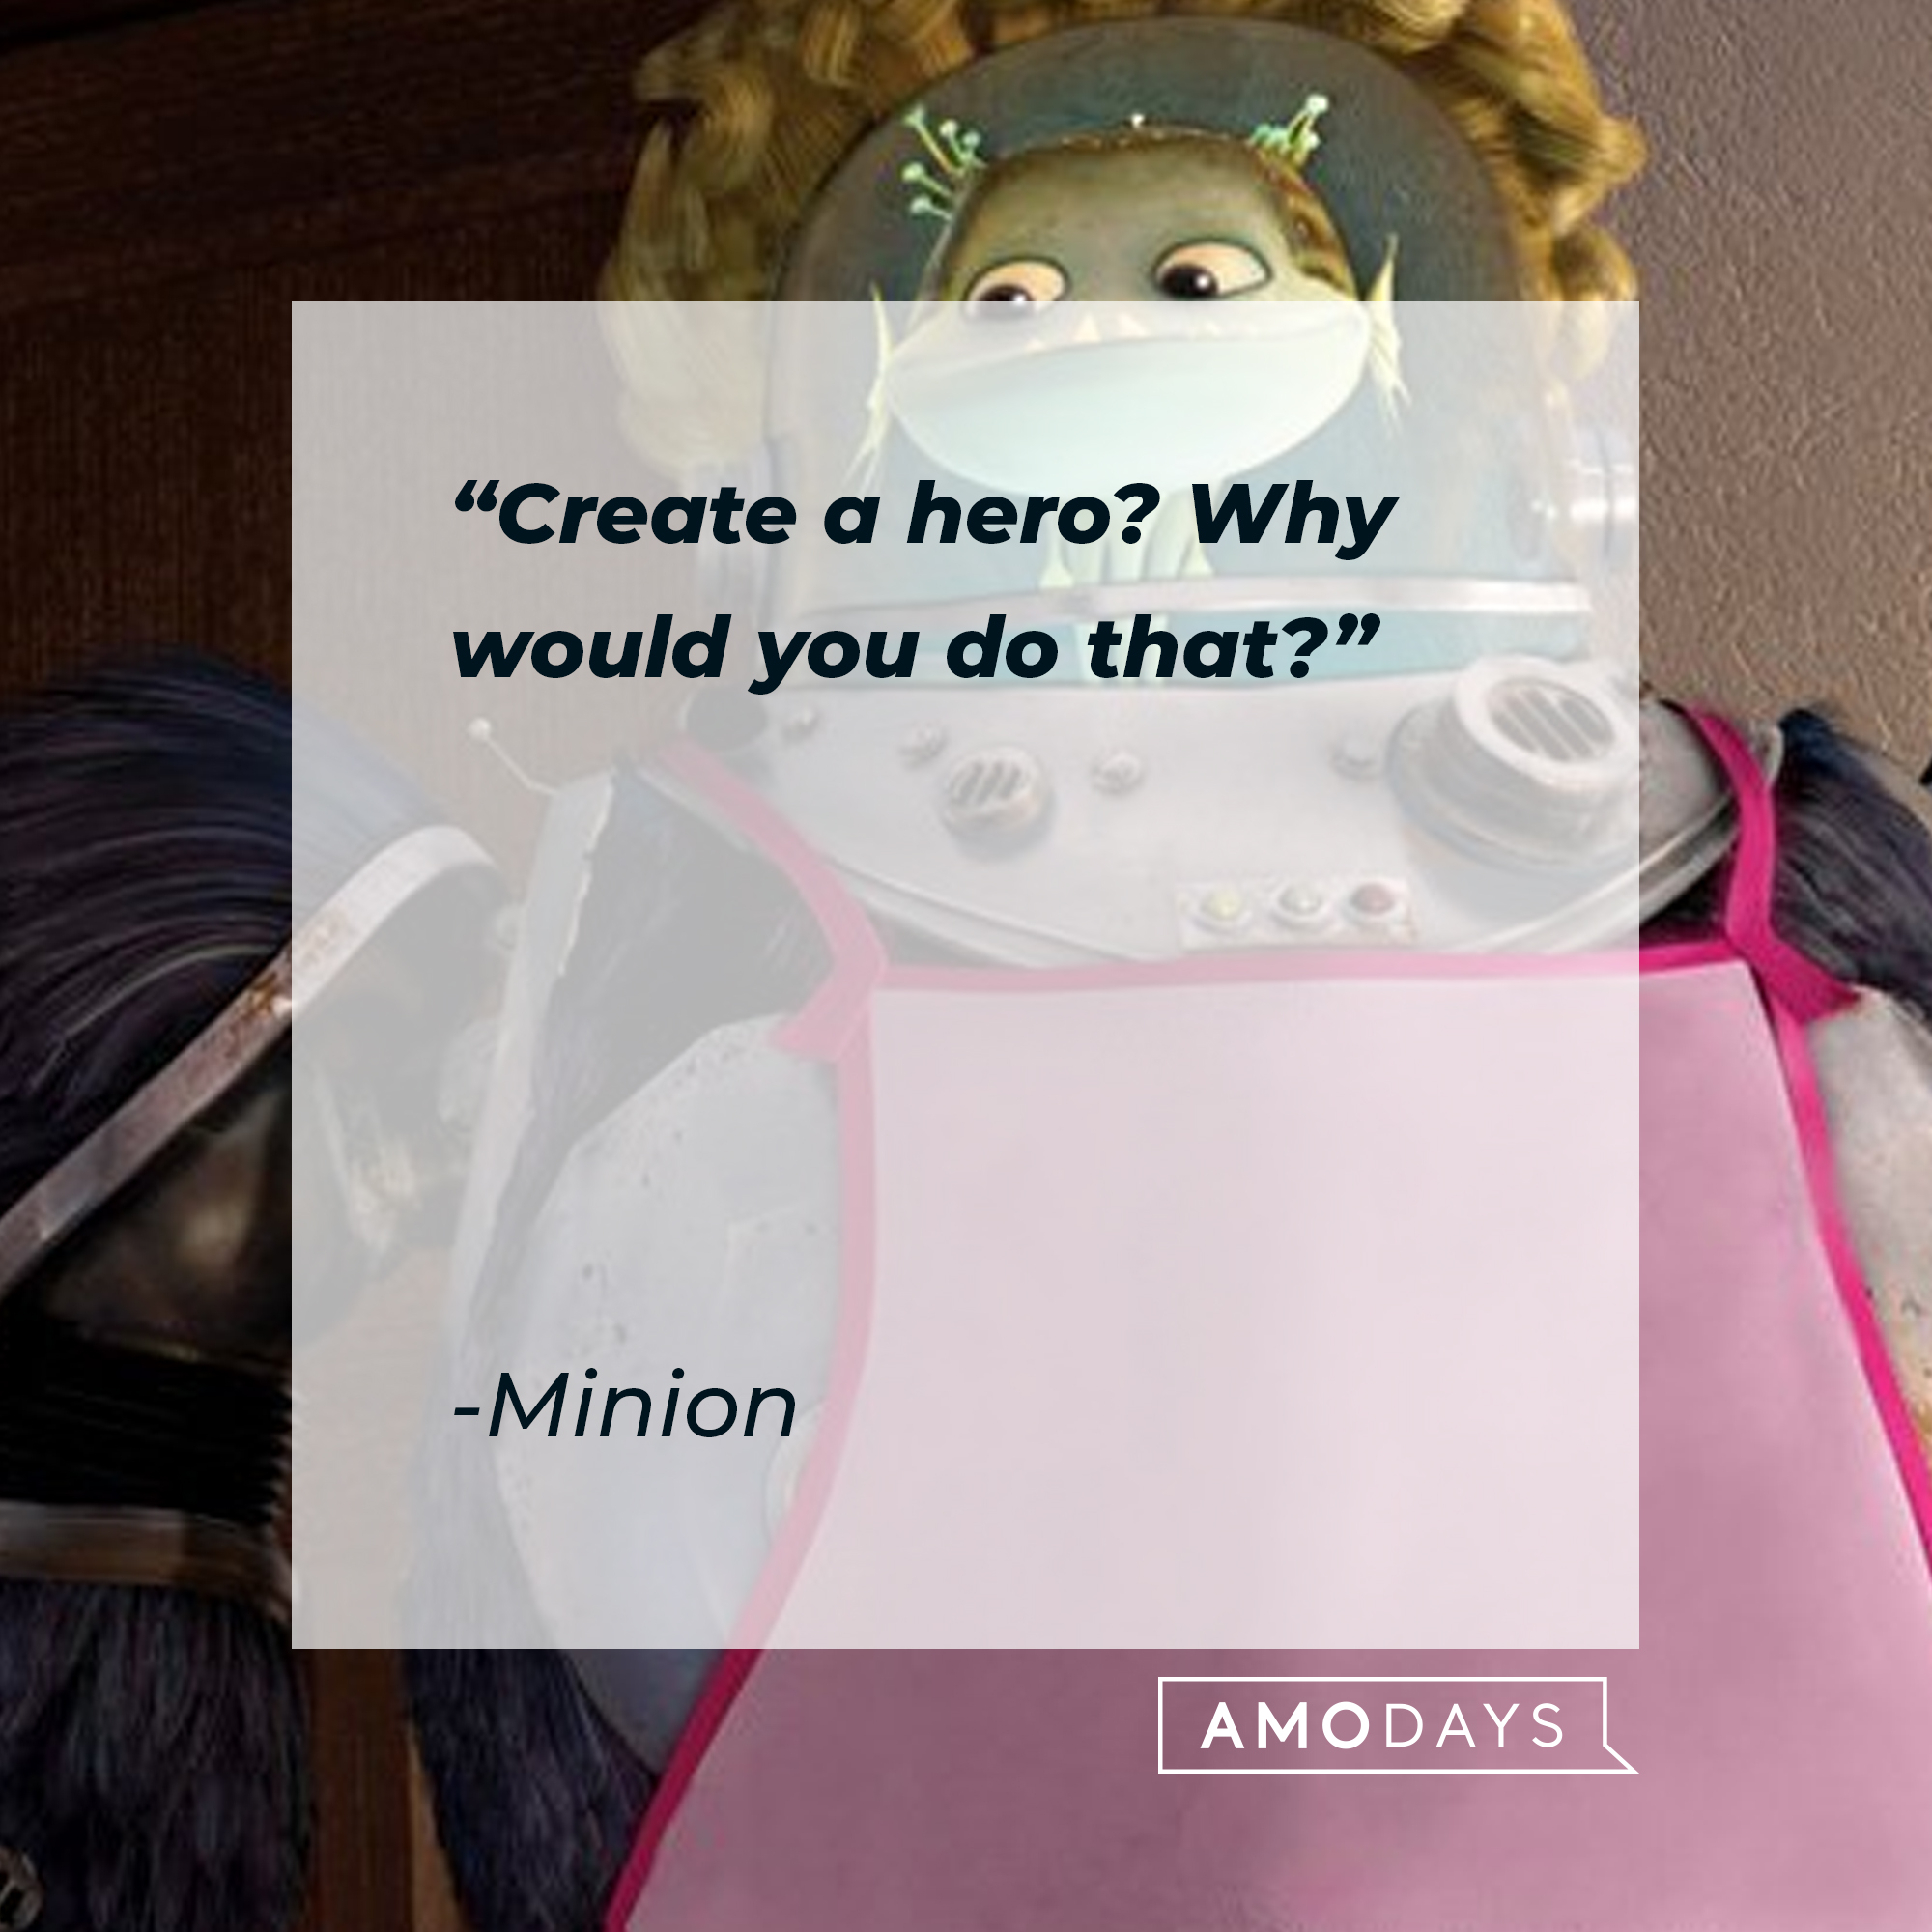 Minion's quote: "Create a hero? Why would you do that?" | Source: Facebook.com/MegamindUK